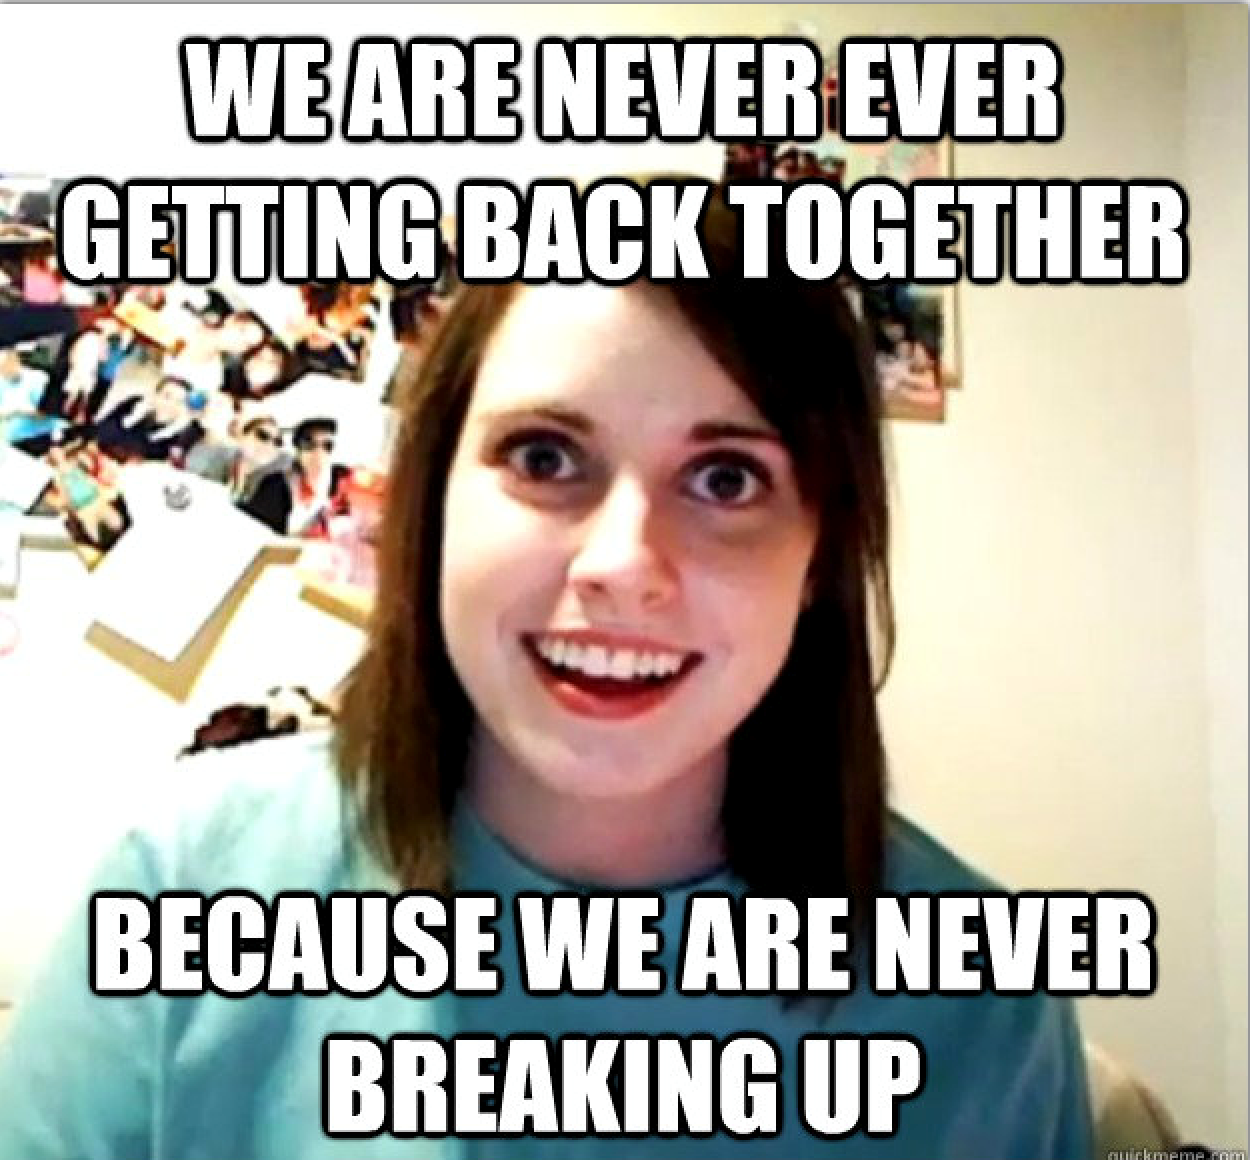 Getting back together. Together because Мем. No girlfriend no problem Мем. We are never ever getting back together. Overly.